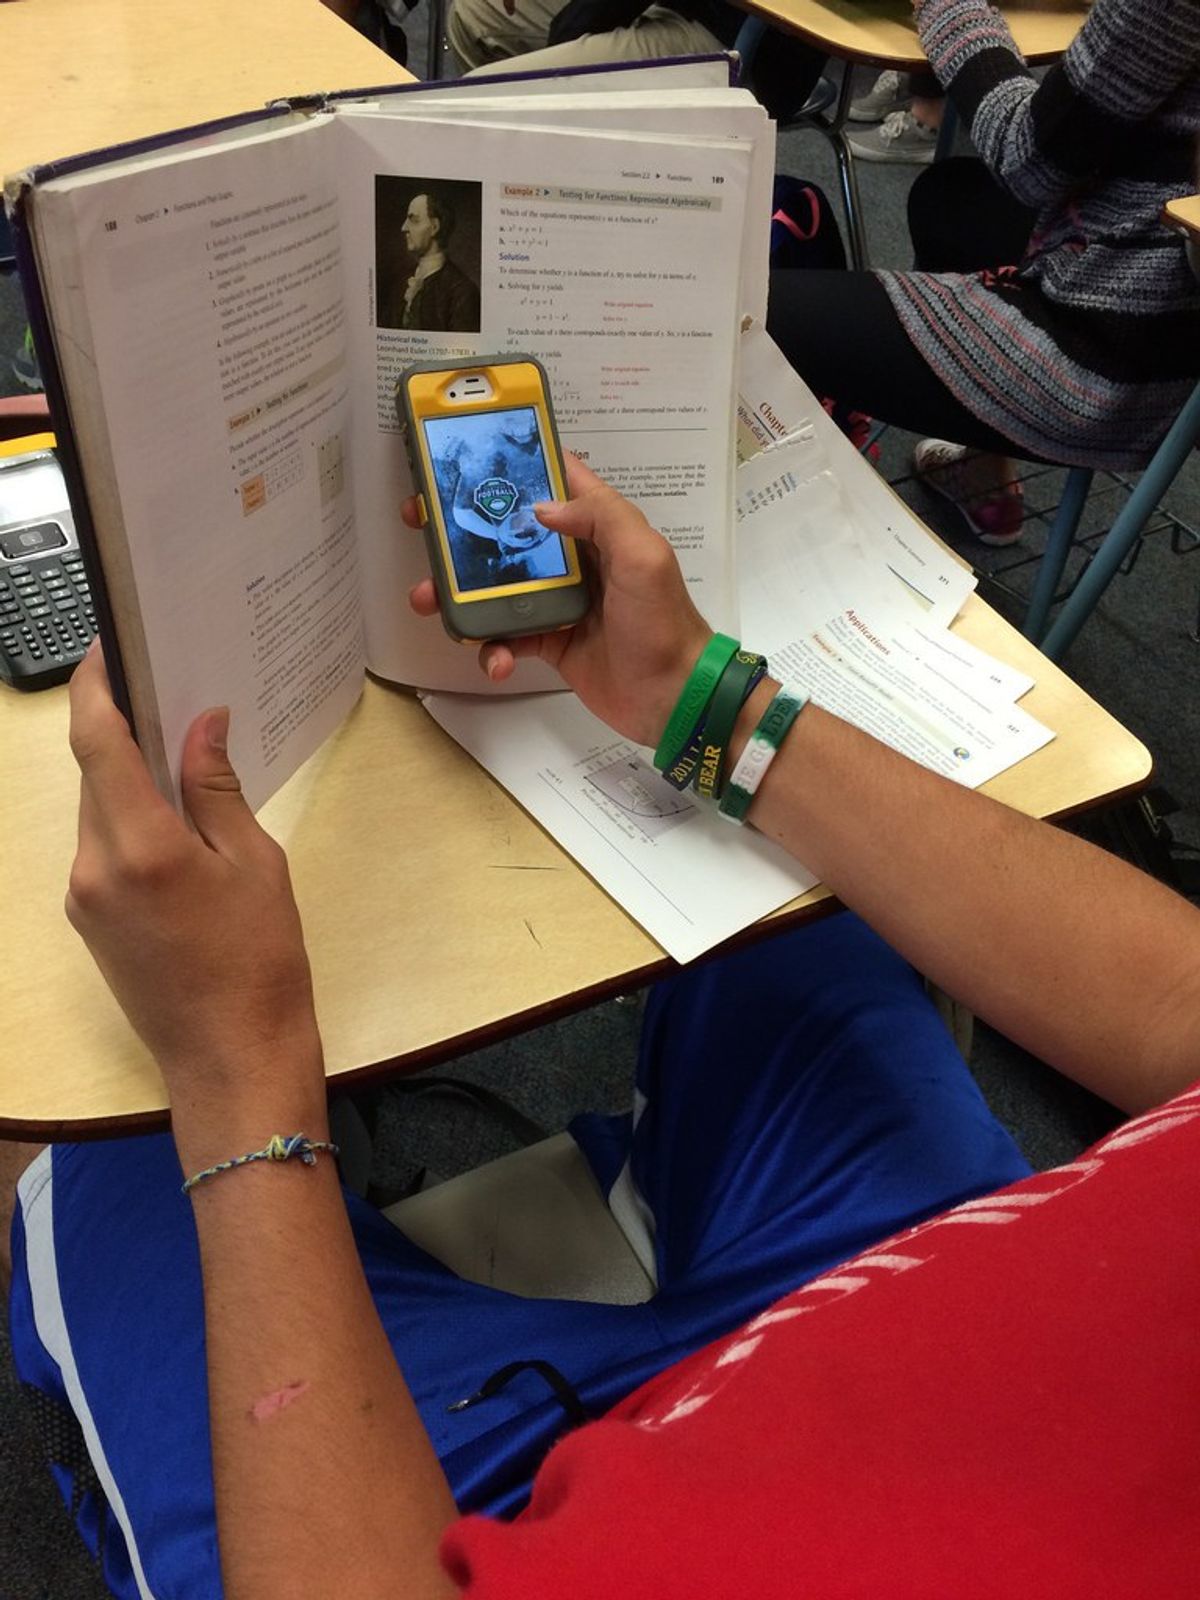 10 Questions I Have For Students On Their Phones In Class